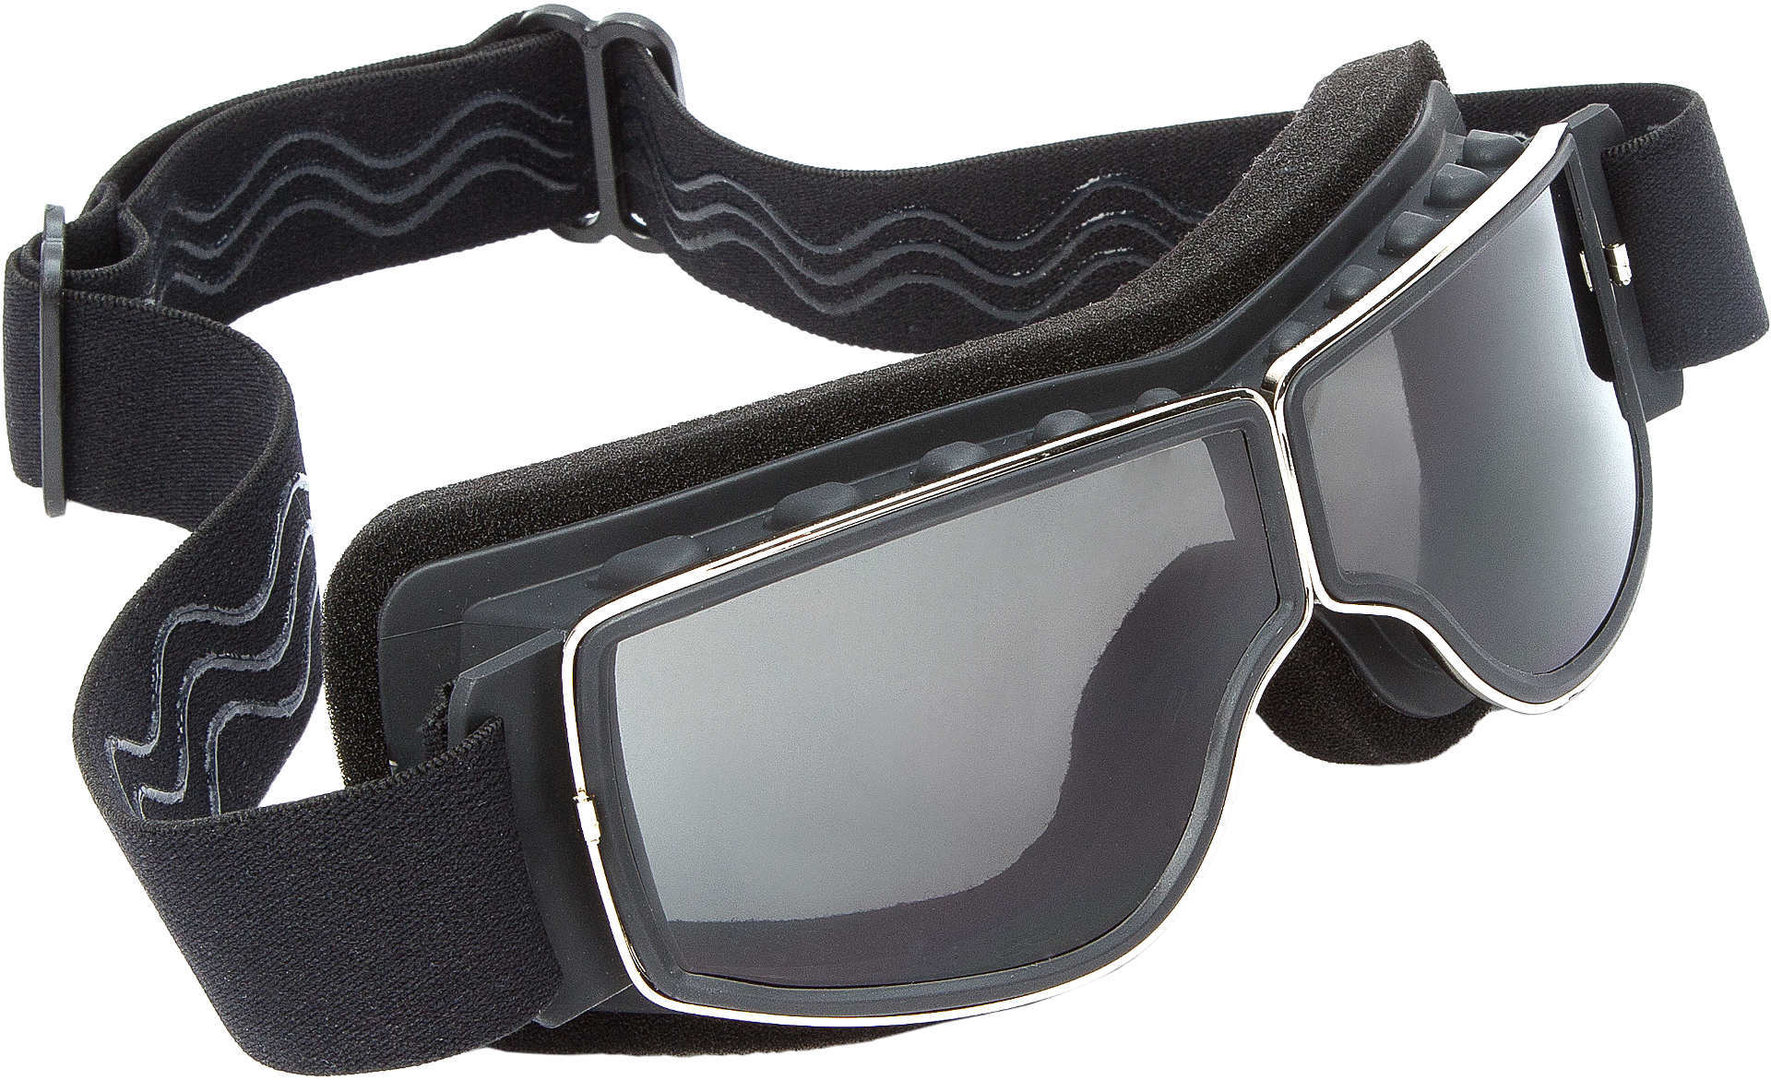 Modeka Nevada Motorcycle Glasses, clear, clear, Size One Size